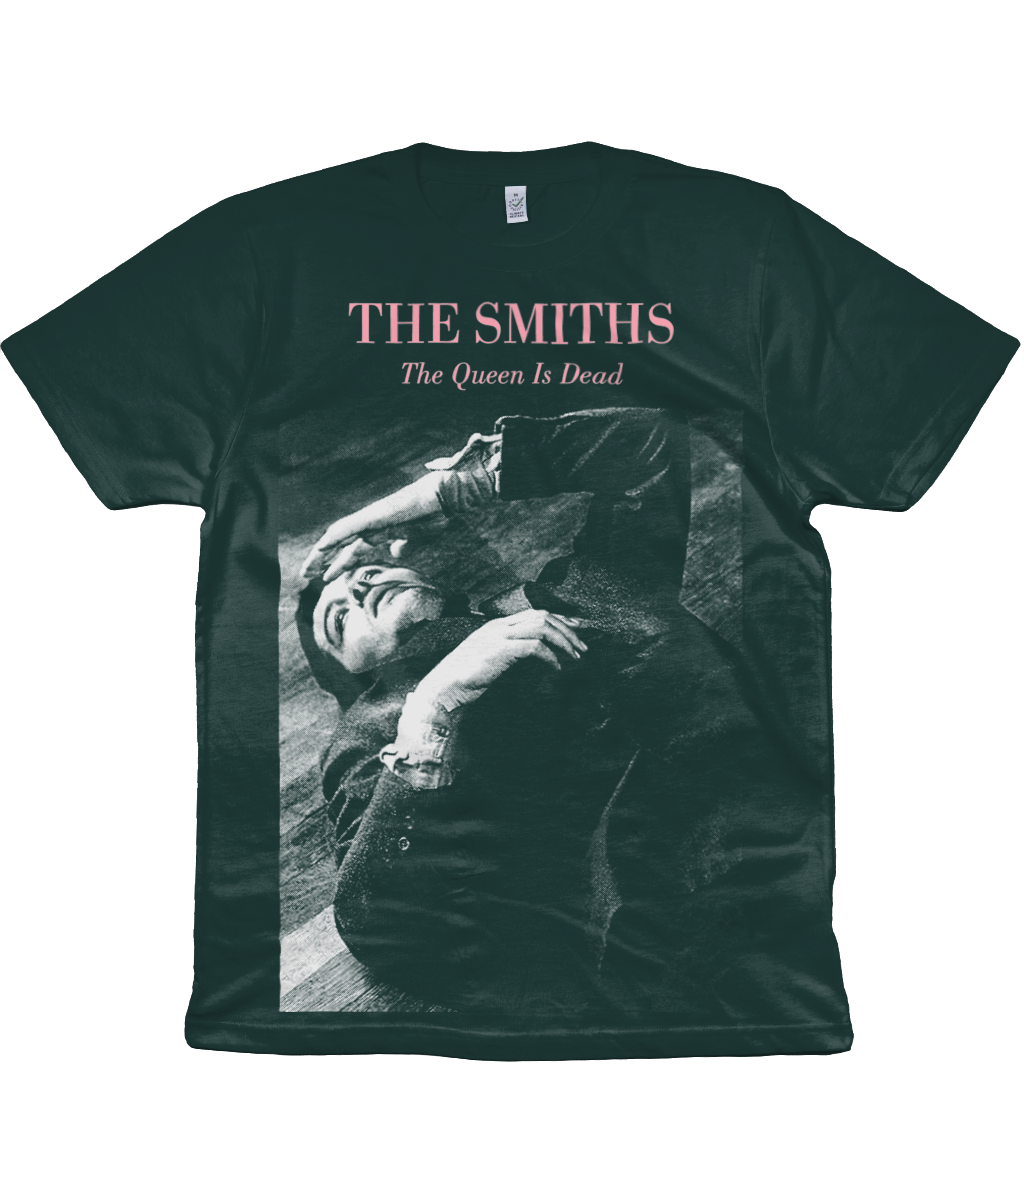 THE SMITHS -The Queen Is Dead - Take me back to Dear Old Blighty - Version 2